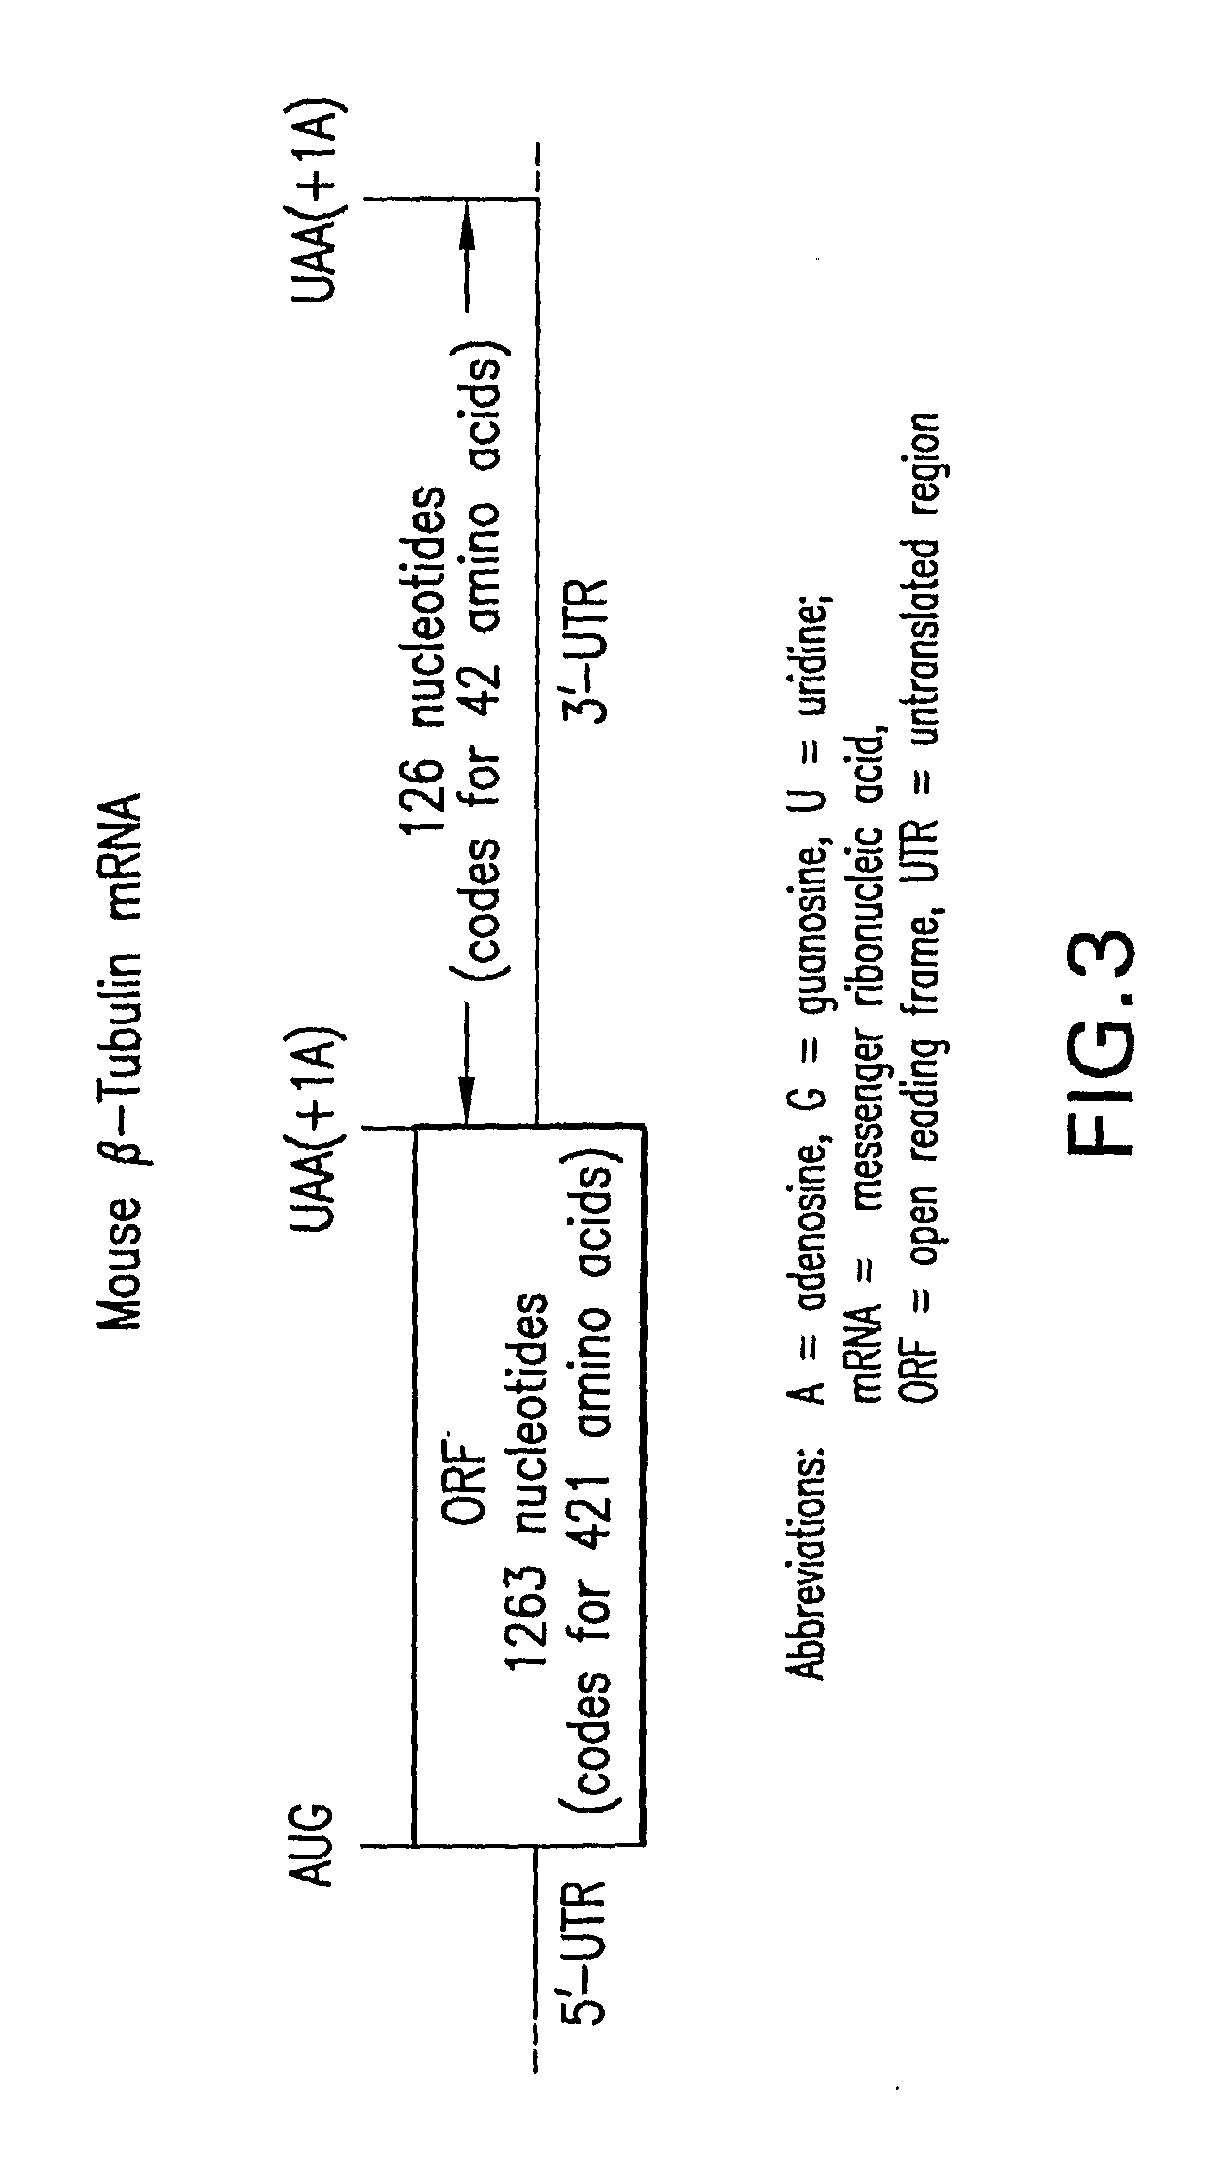 Methods for the production of functional protein from DNA having a nonsense mutation and the treatment of disorders associcated therewith